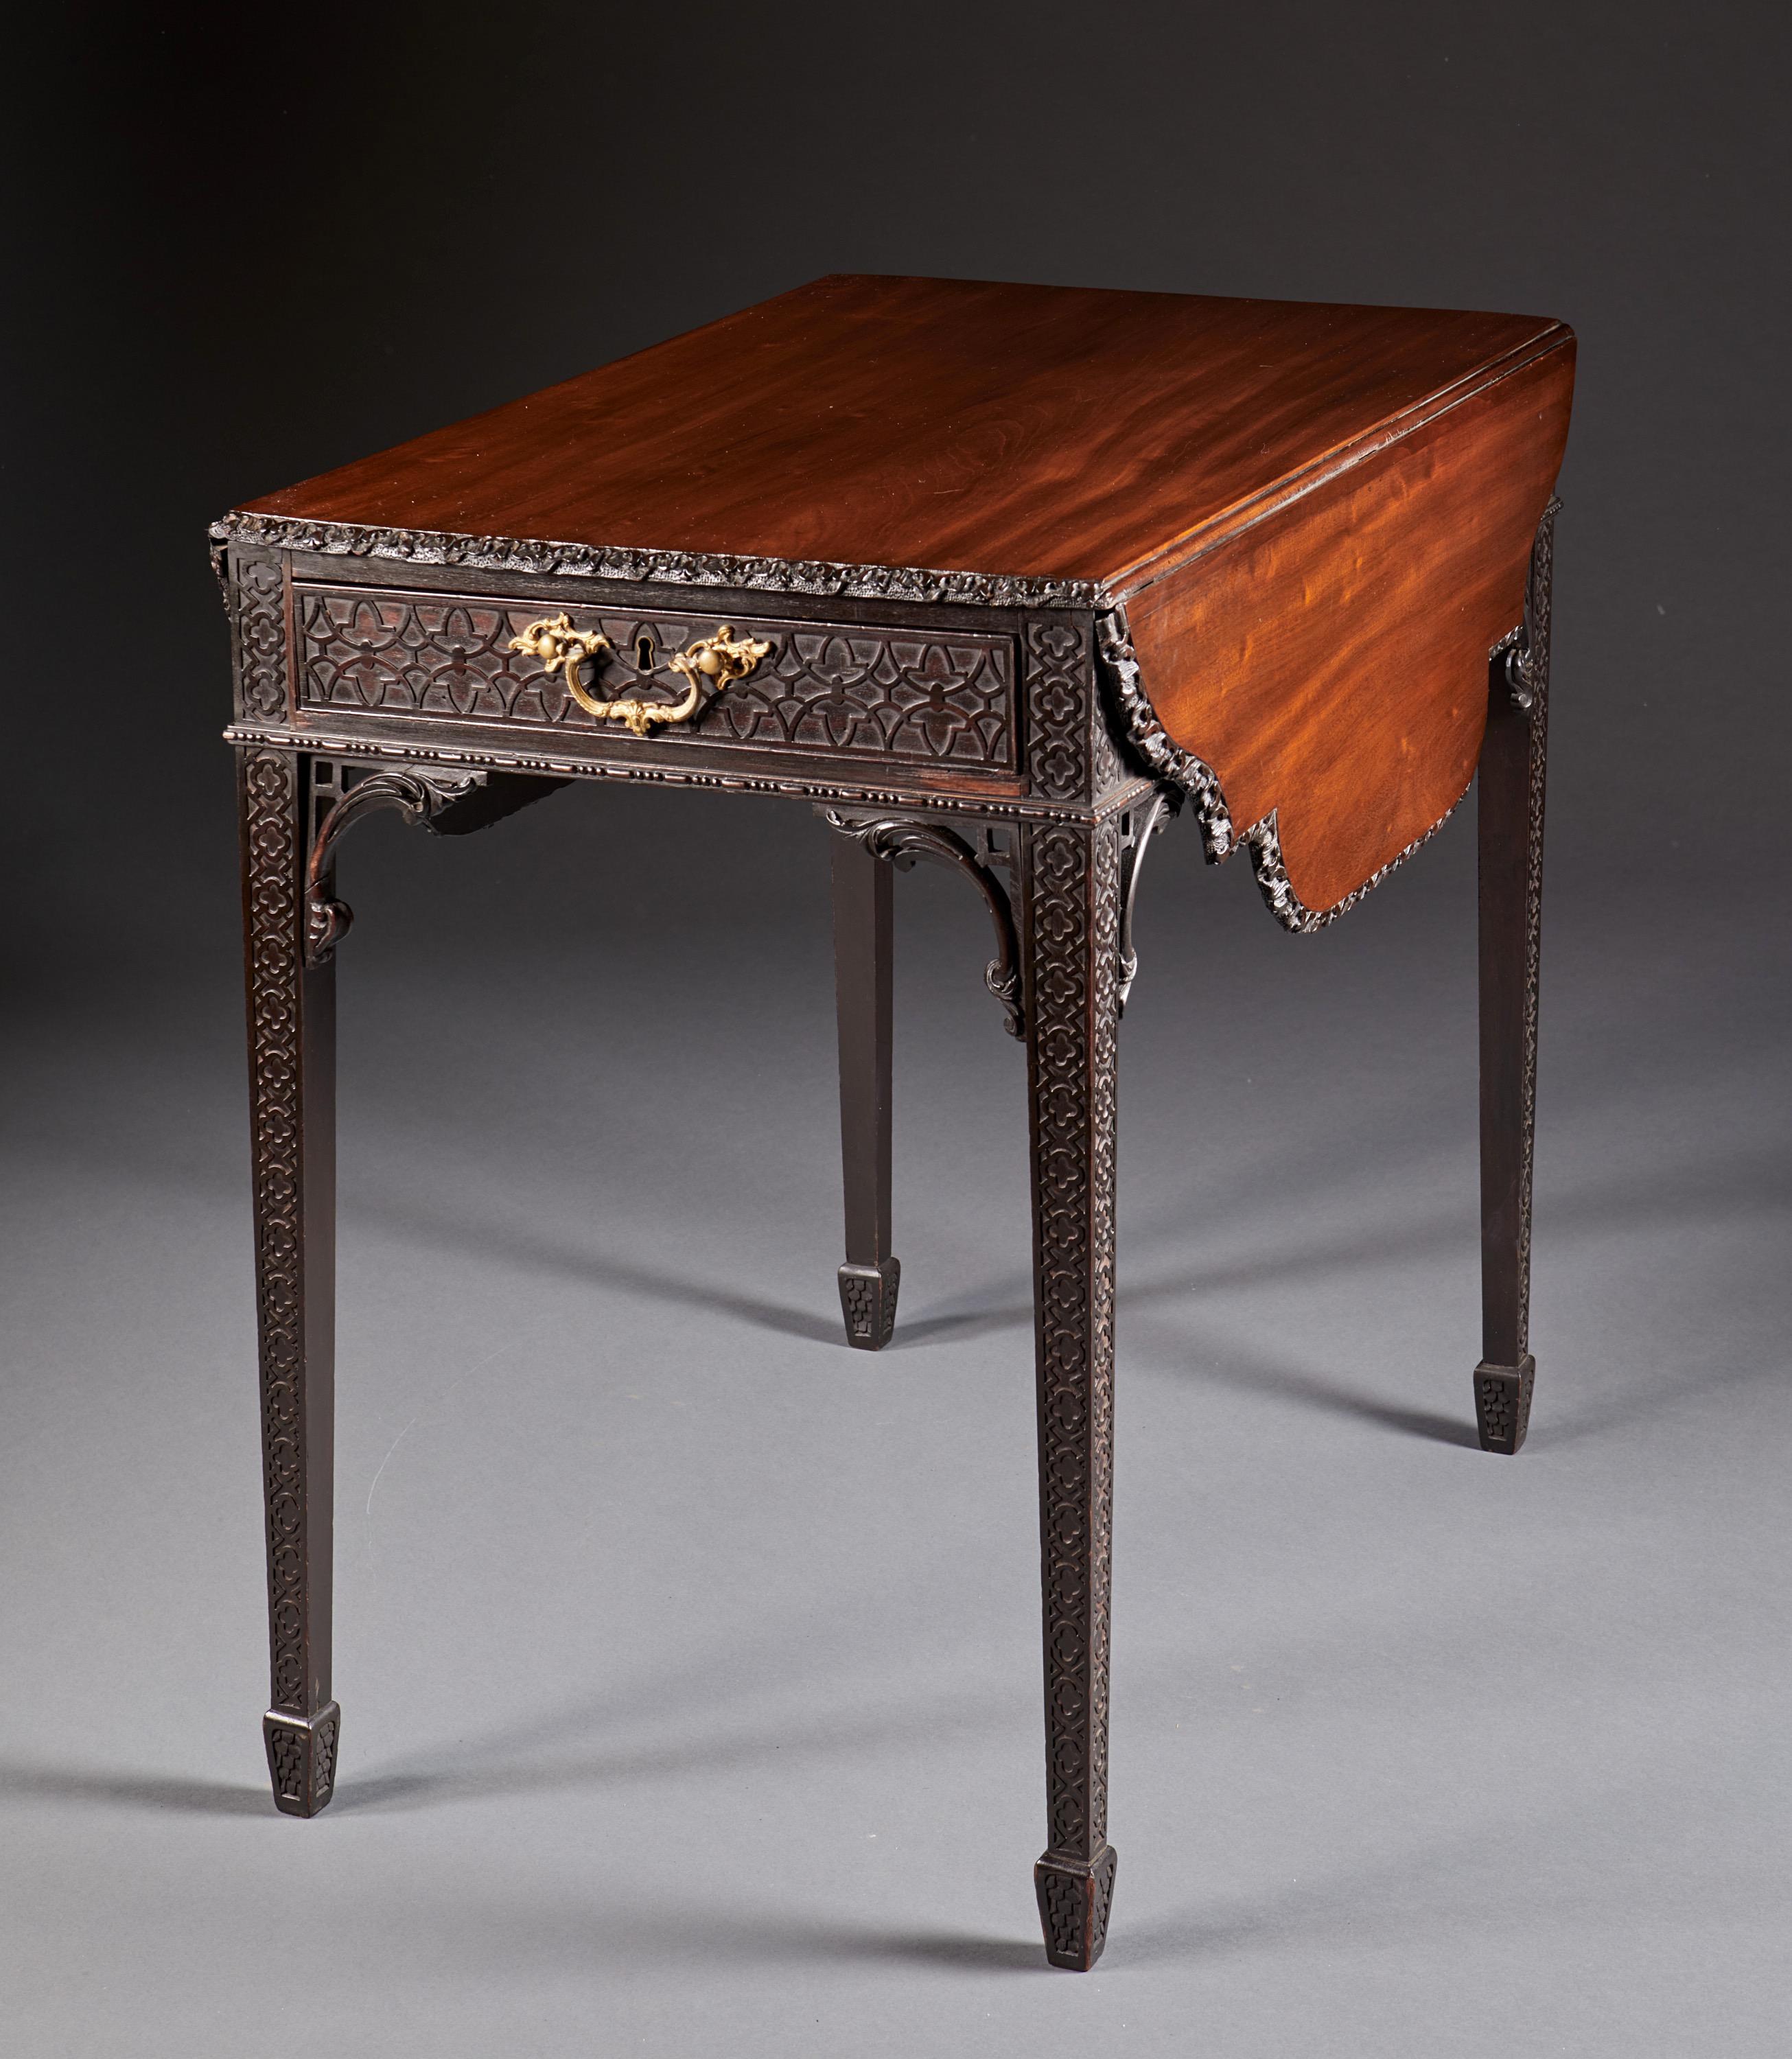 A blind fretwork mahogany Hepplewhite style pembroke table of the finest quality with tapered legs ending in spade feet. The shaped top with deeply carved edge is above a rectangular case with single working drawer with original Rococo gilt